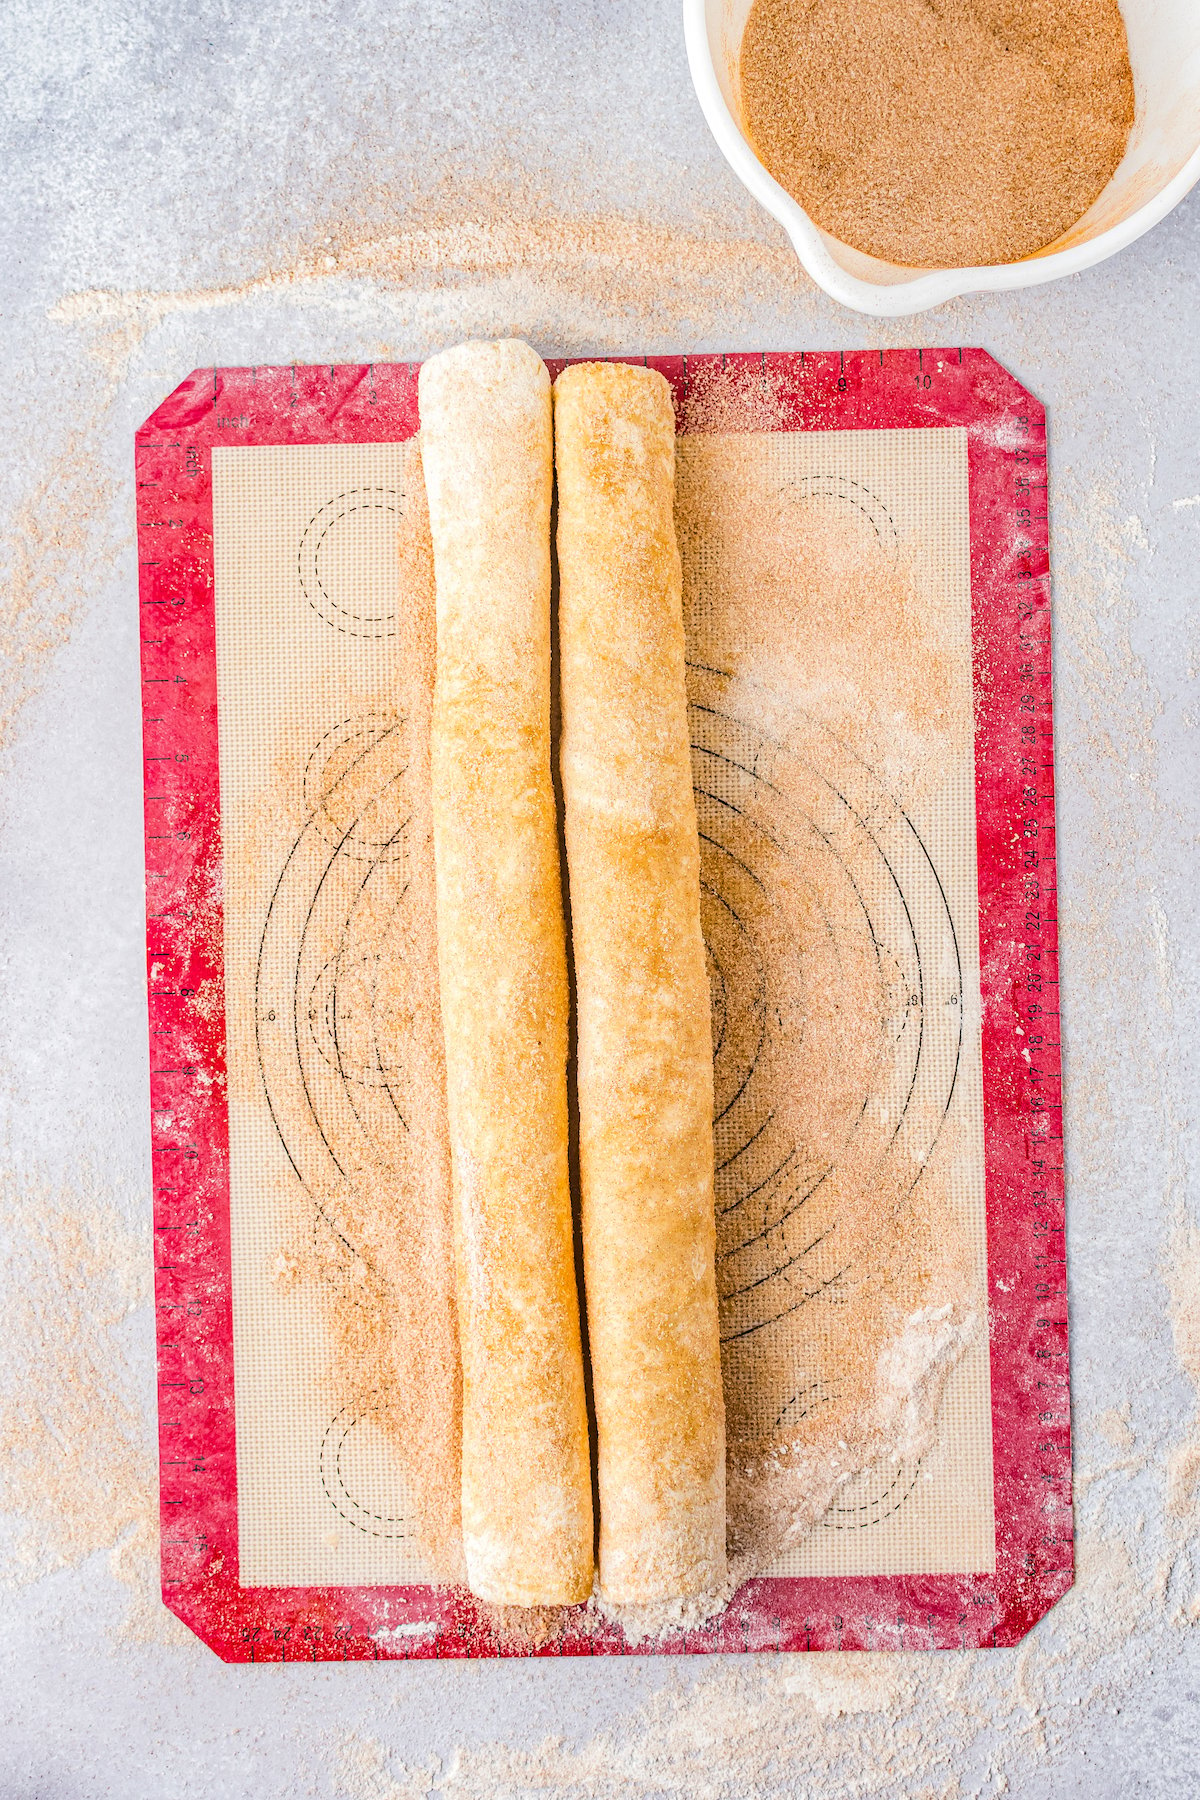 two sections of rolled dough rolled in cinnamon sugar on a silicone mat